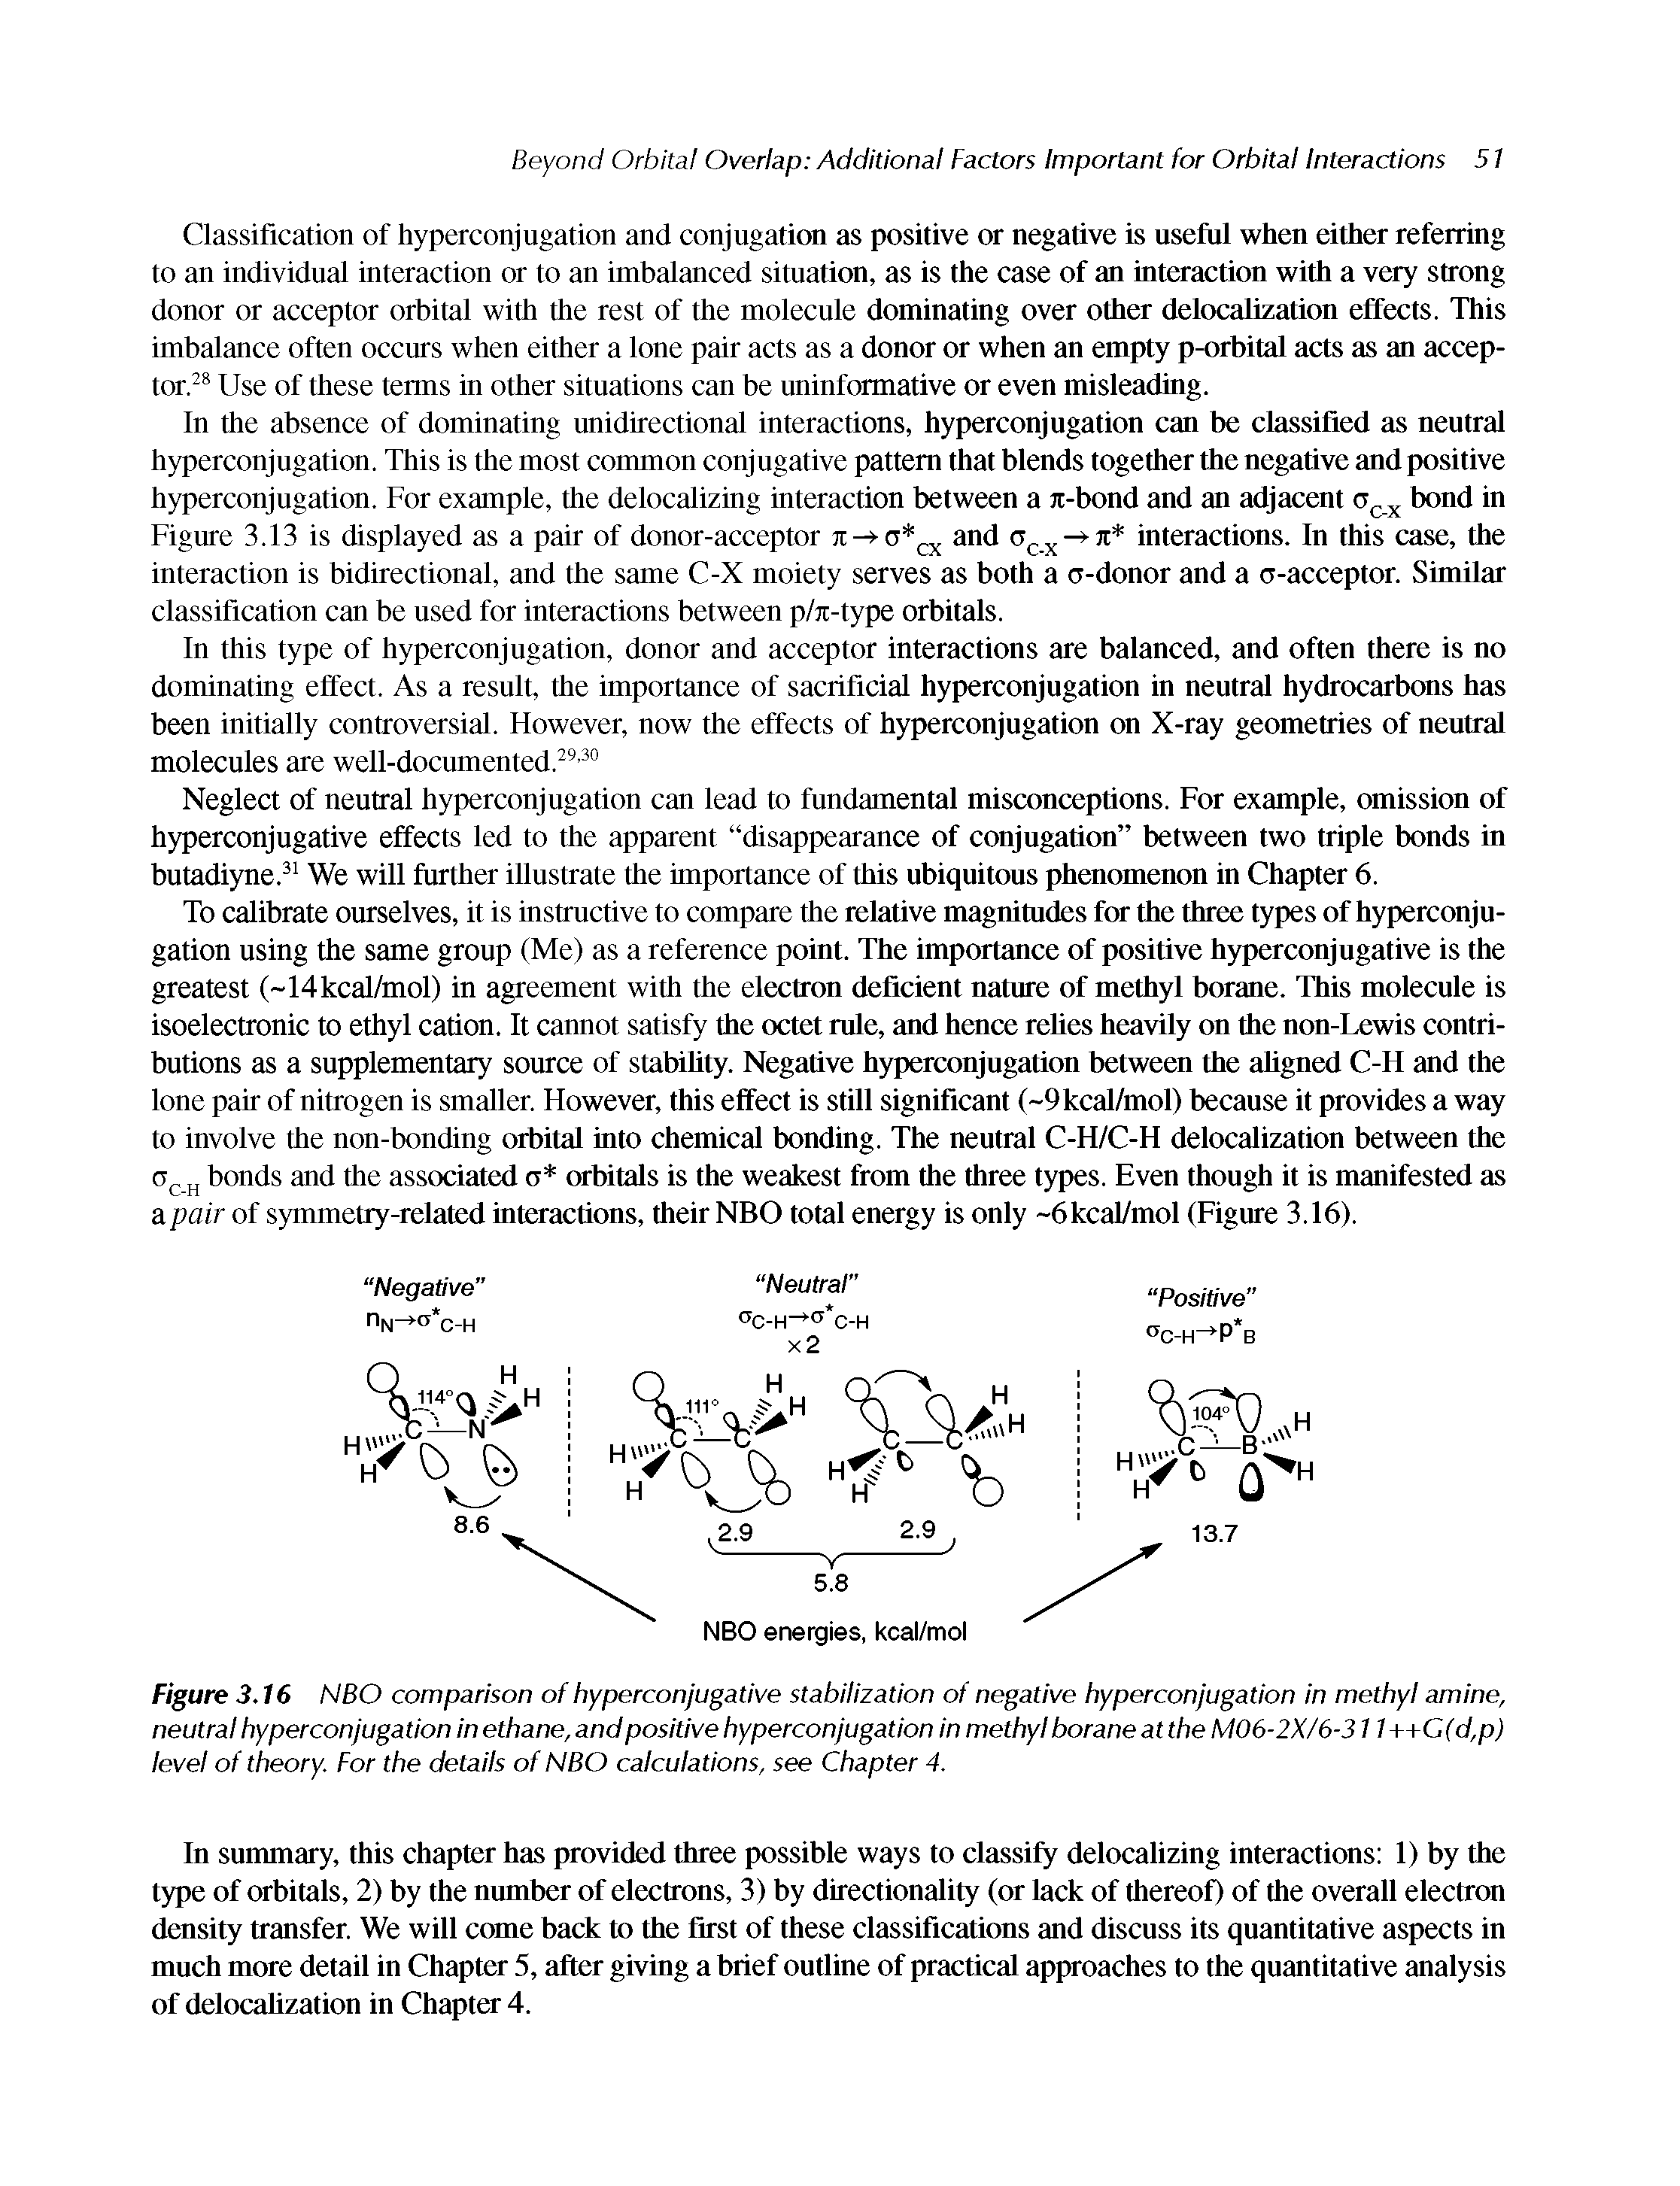 Figure 3.16 NBO comparison of hyperconjugative stabilization of negative hyperconjugation in methyl amine, neutral hyper conjugation in ethane, and positive hyperconjugation in methyl borane at the M06-2X/6-311 ++C(d,p) level of theory. For the details of NBO calculations, see Chapter 4.